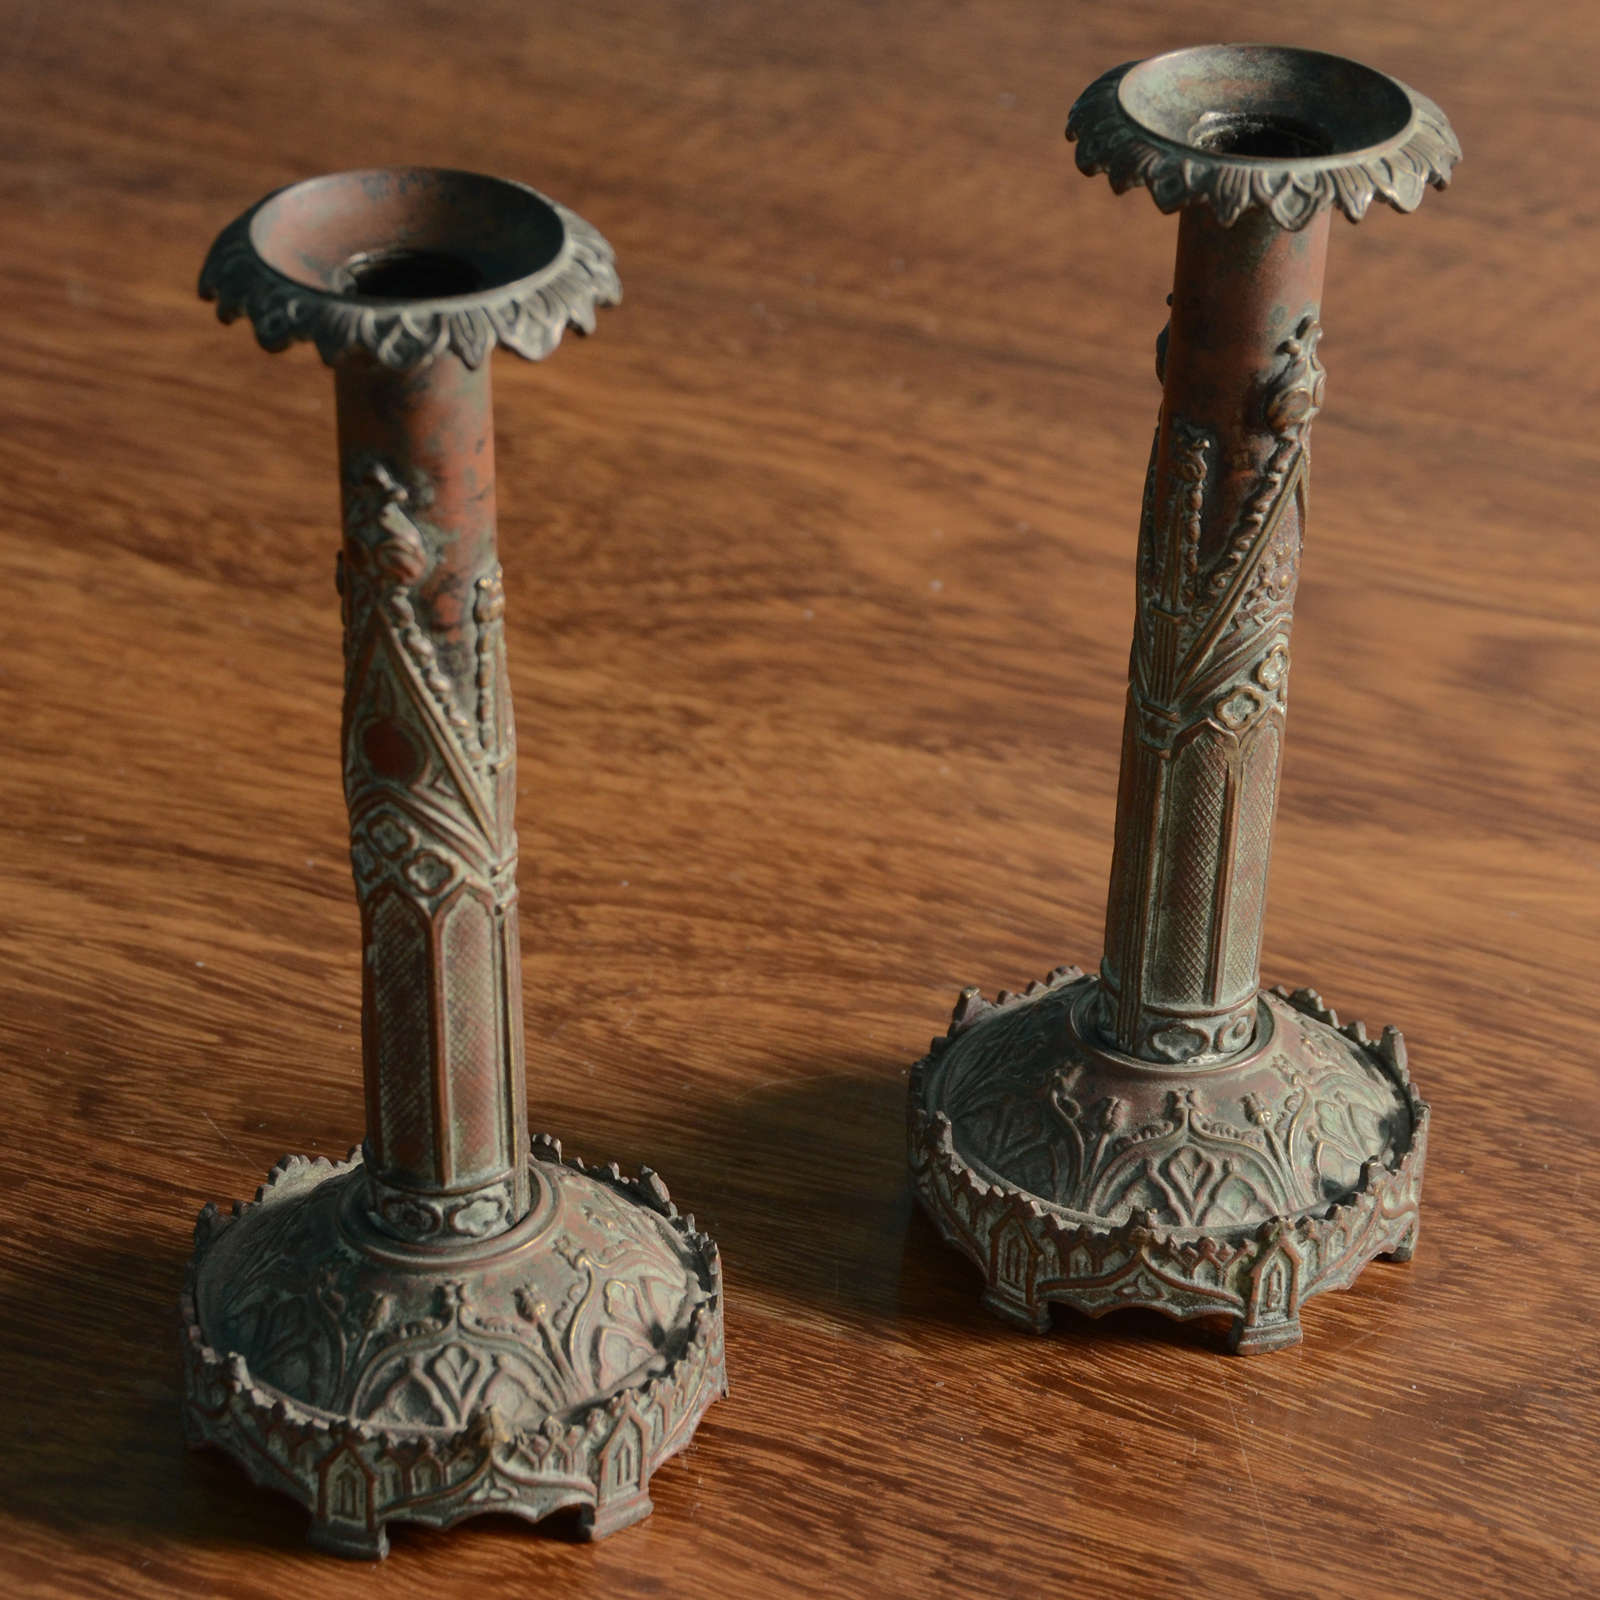 Candlesticks with stamped Gothic architectural ornament: crockets, tracery, trefoils.  Candle holders are removable.  Similar to 